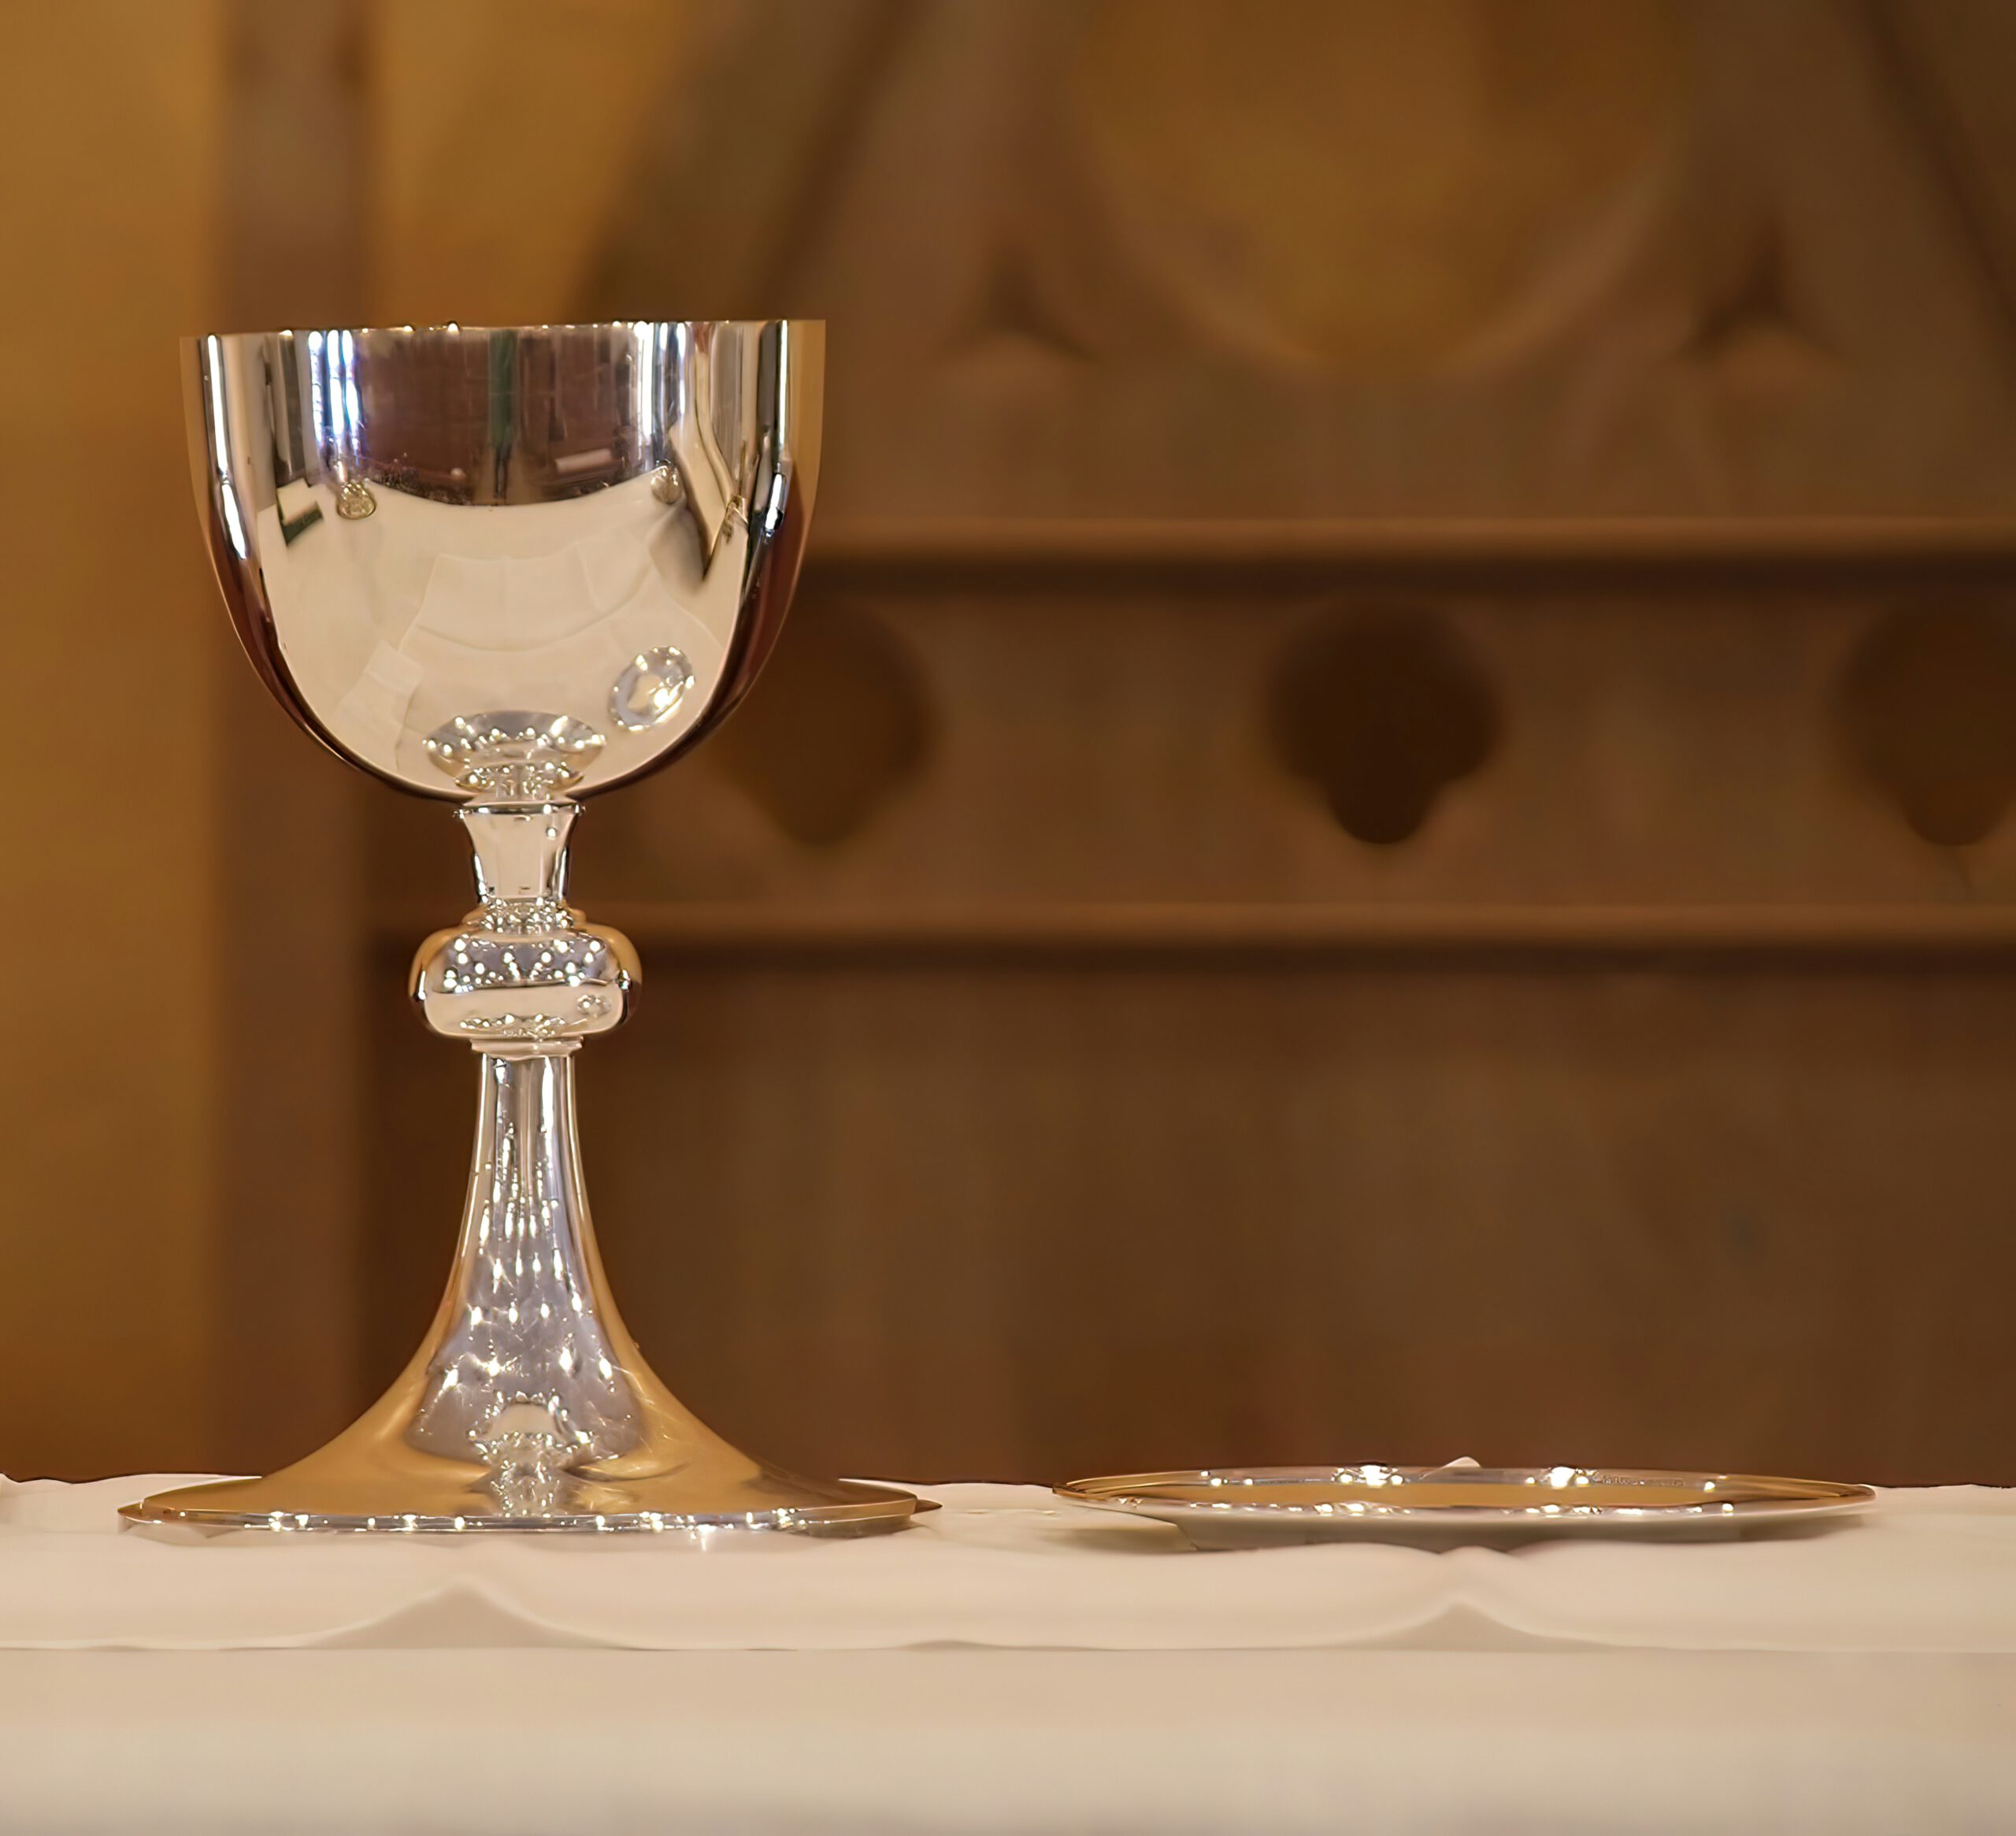 The Silver Chalice, A Story of faith